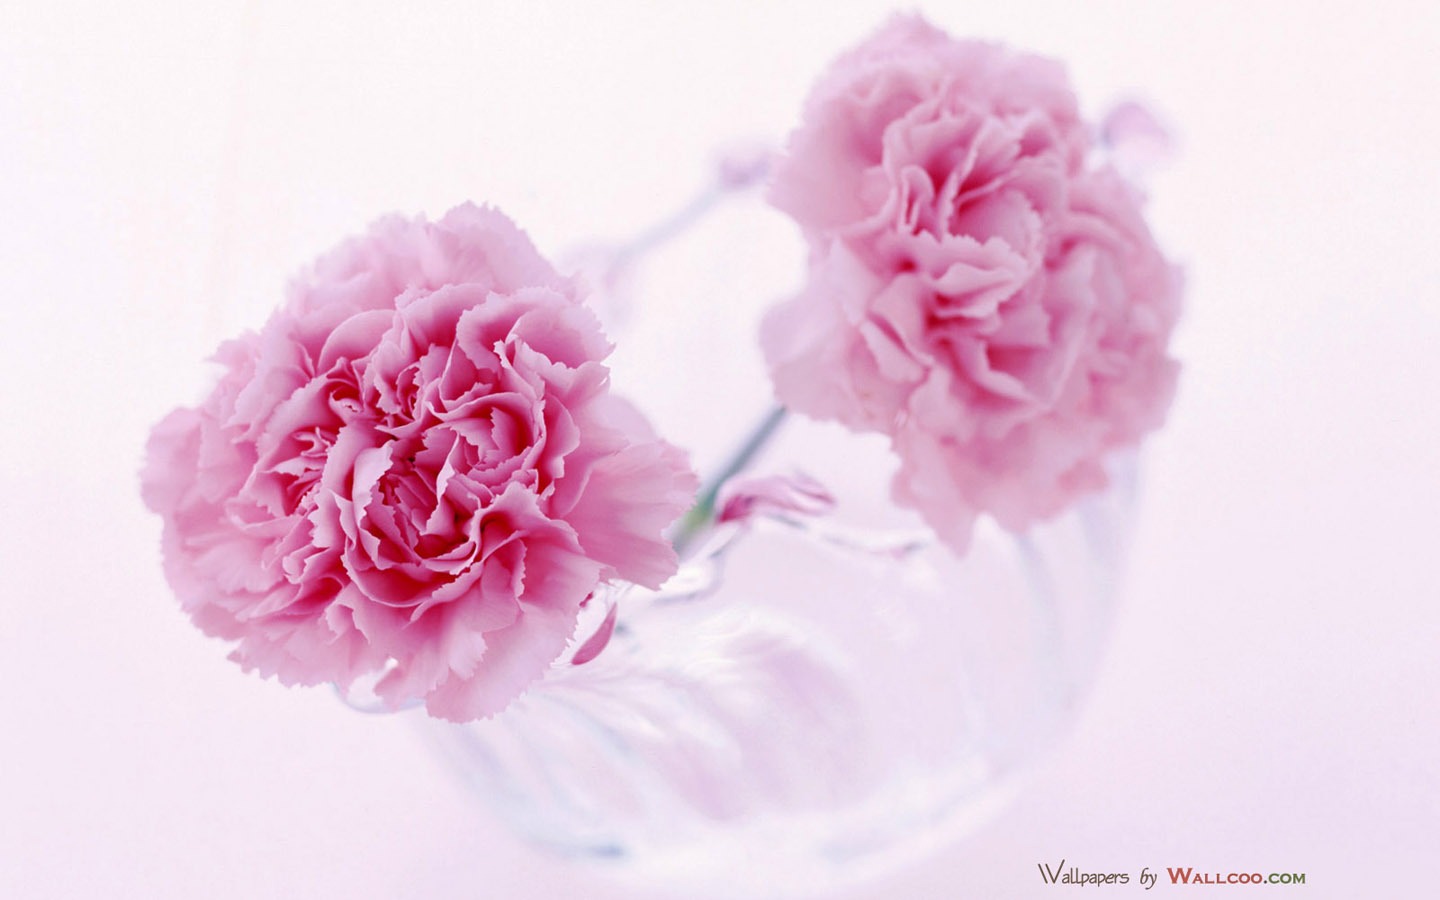 Mother's Day of the carnation wallpaper albums #33 - 1440x900